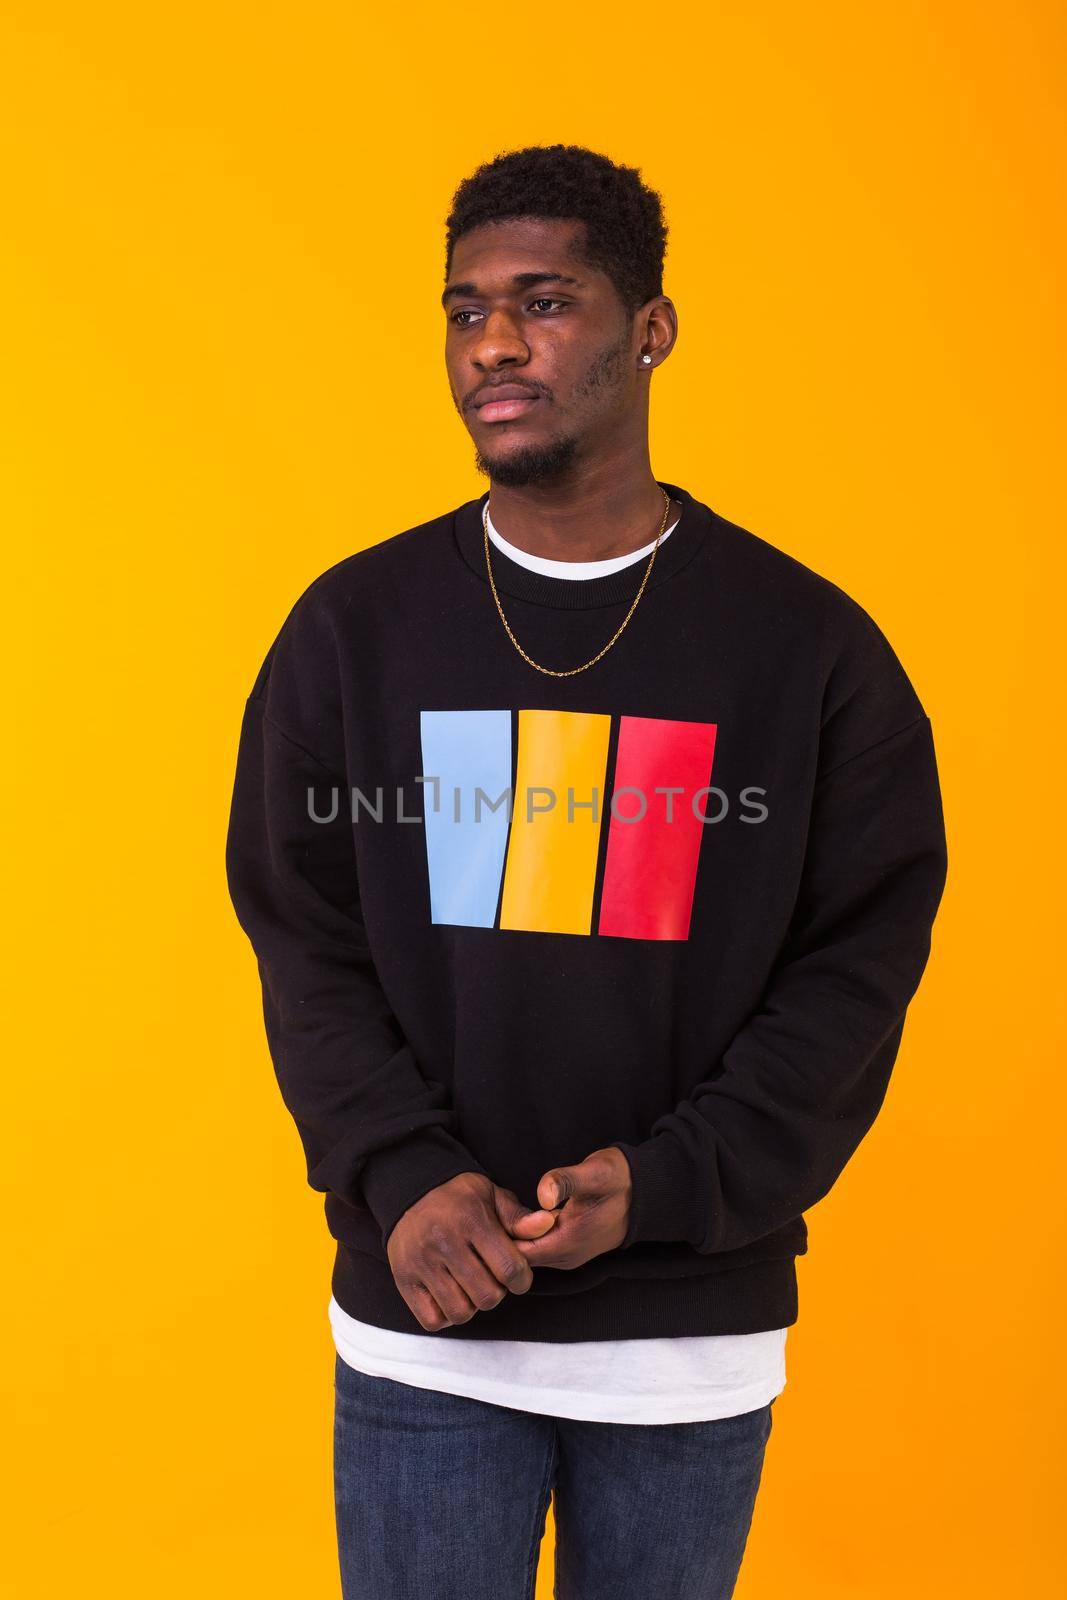 Portrait handsome young black man dressed in jeans and hoodie on white background. Street fashion and modern youth culture